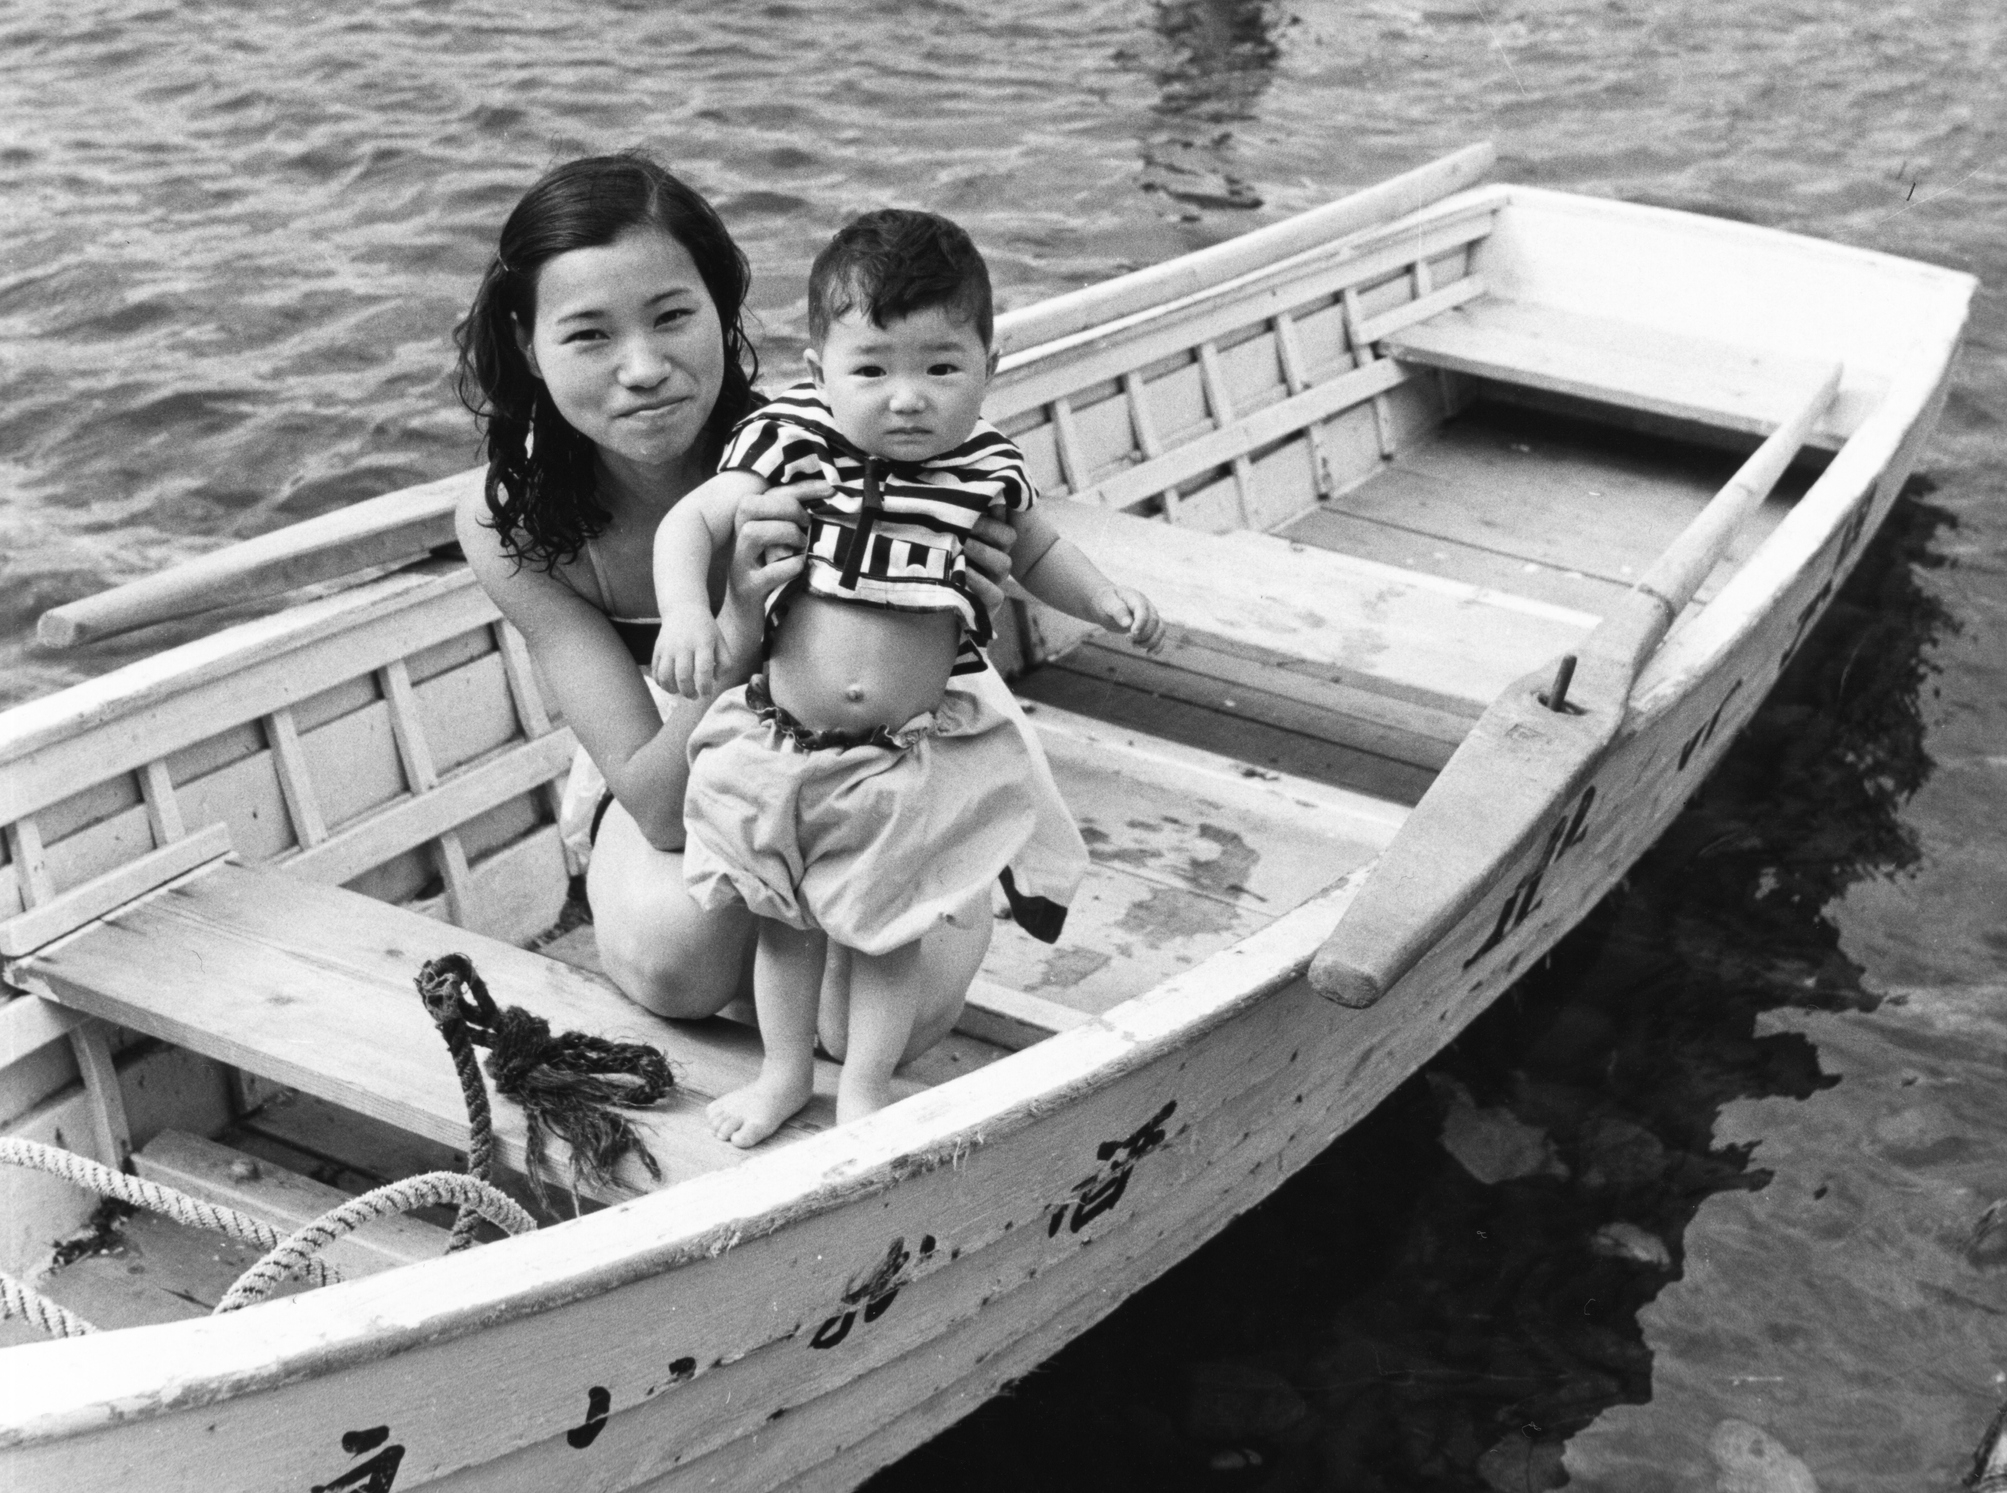 A woman on a boat holding her baby boy